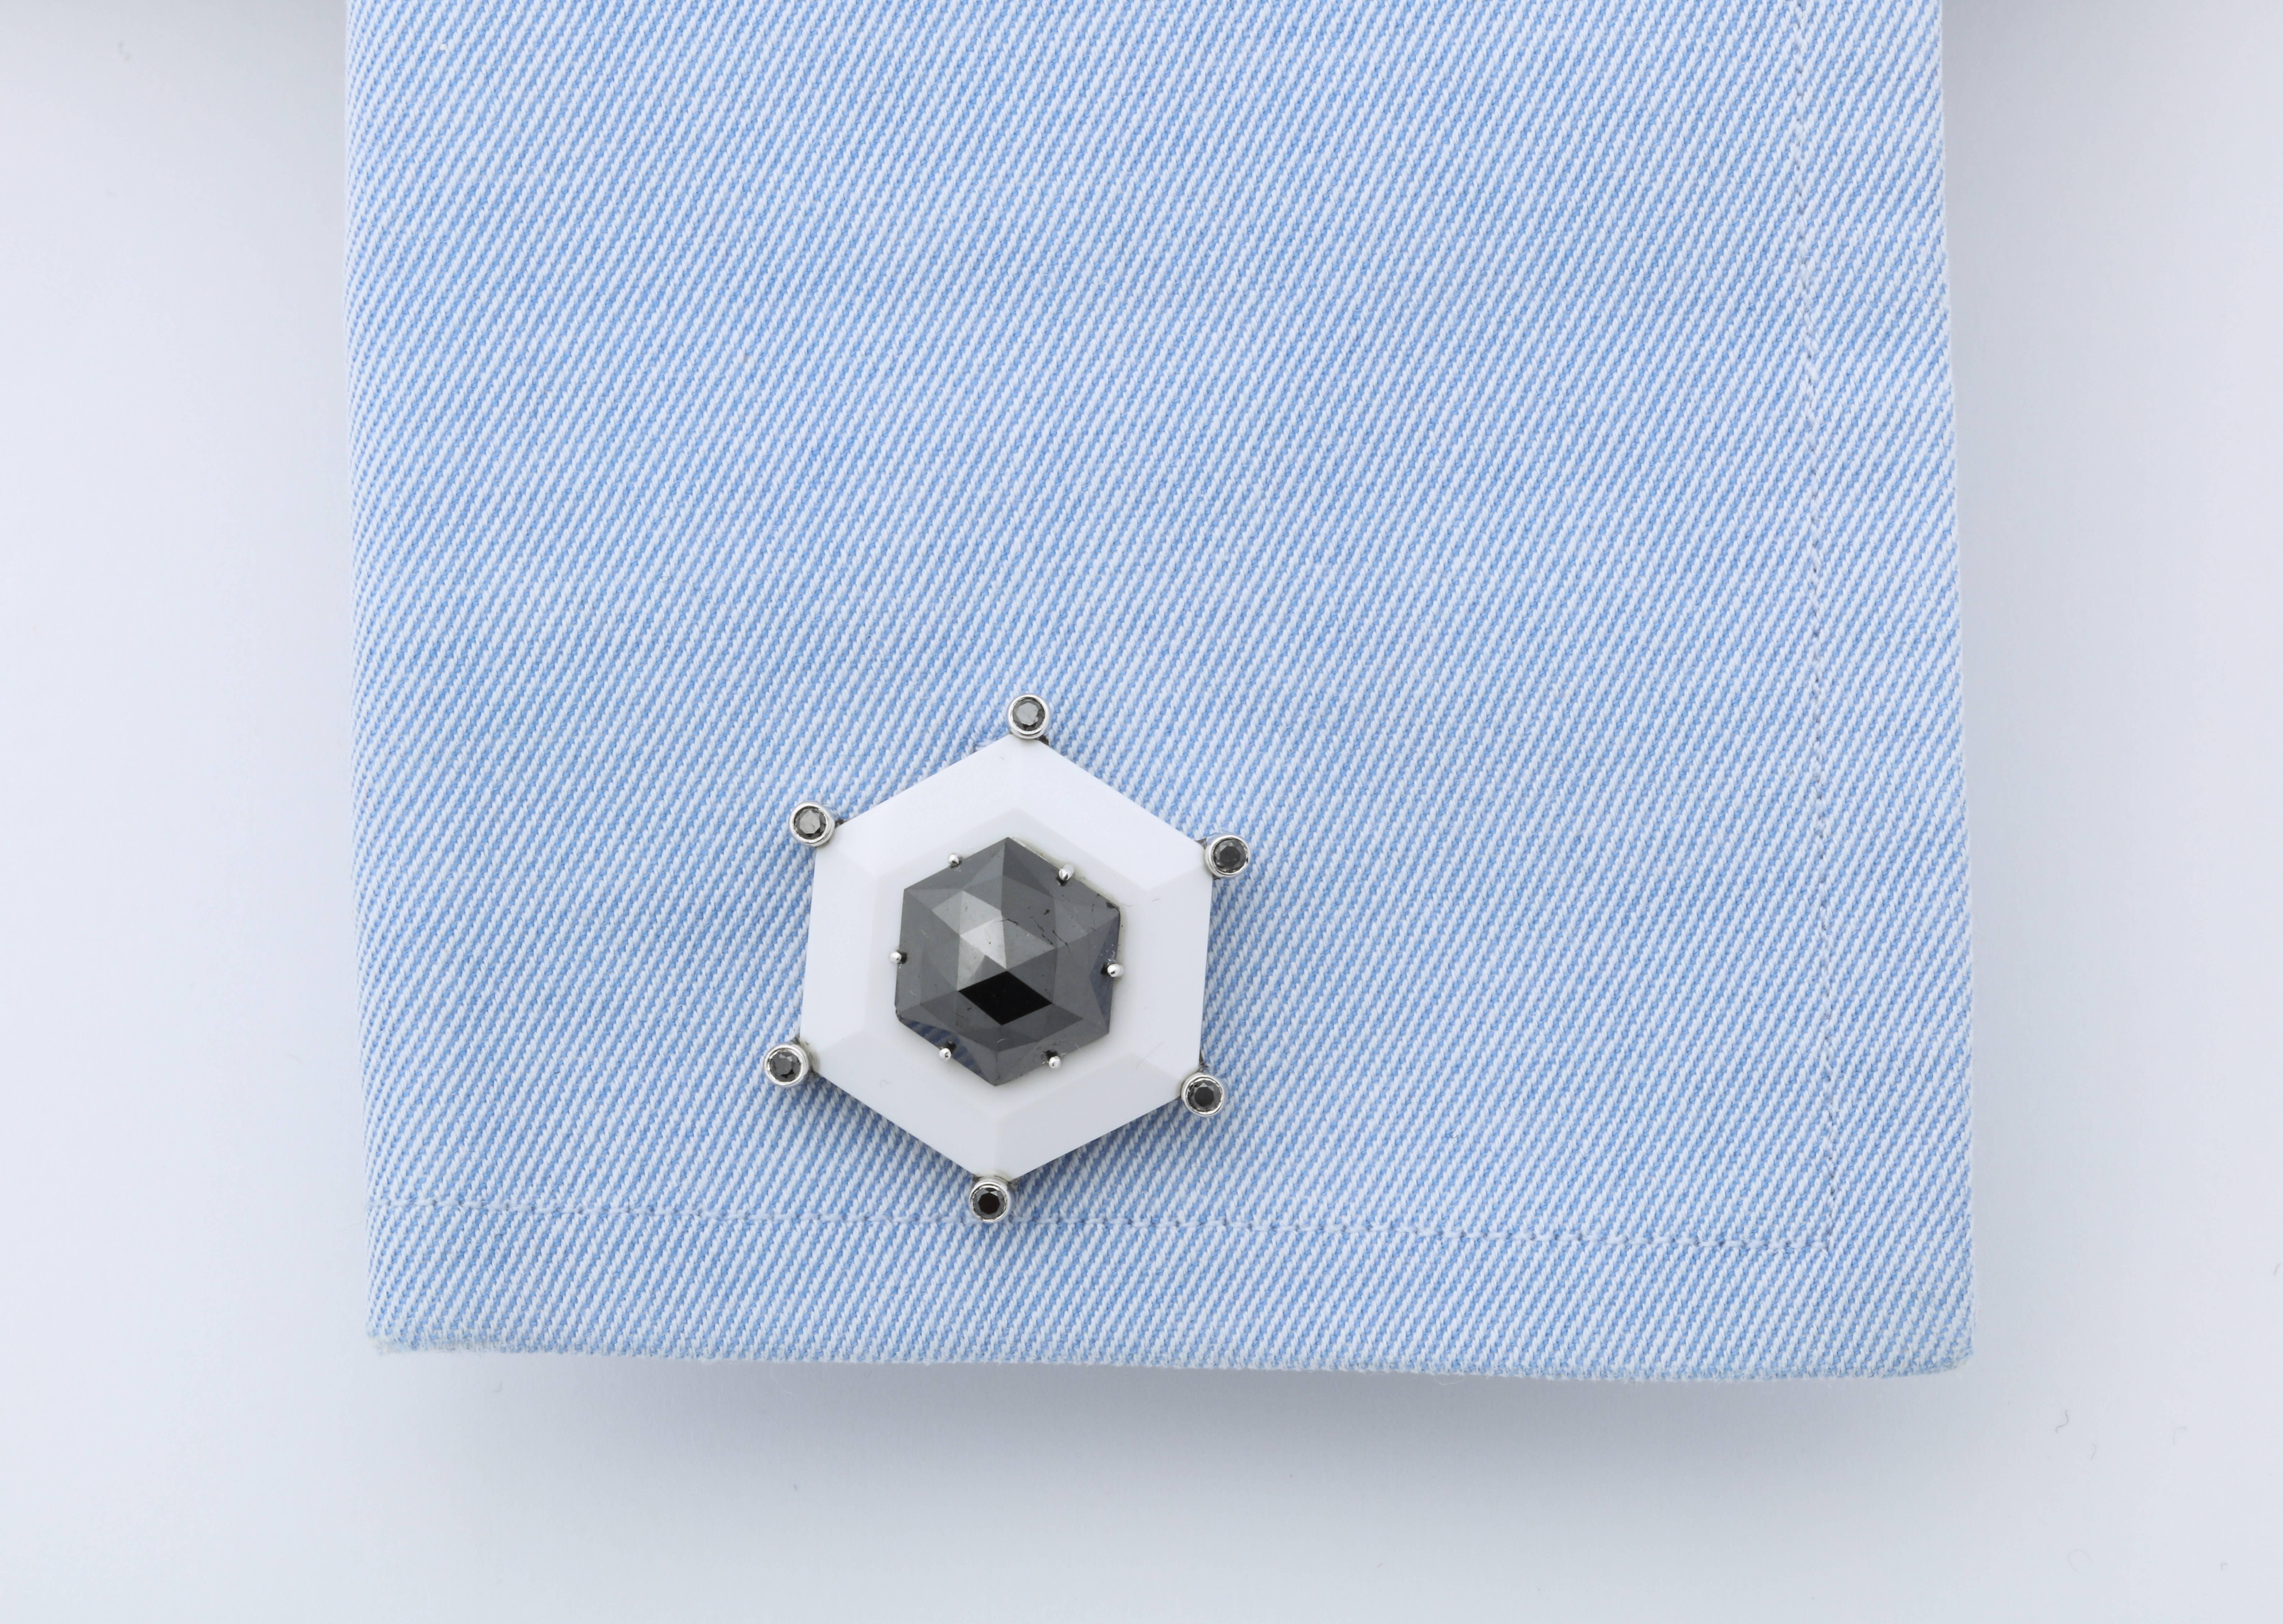 These completely bespoke cufflinks feature custom cut hexagonal black diamonds (2.96cts & 2.60cts) centrally set above white agate framed with bezel set round black diamonds.  The back of the cufflinks are also set with a pair of hexagonal black